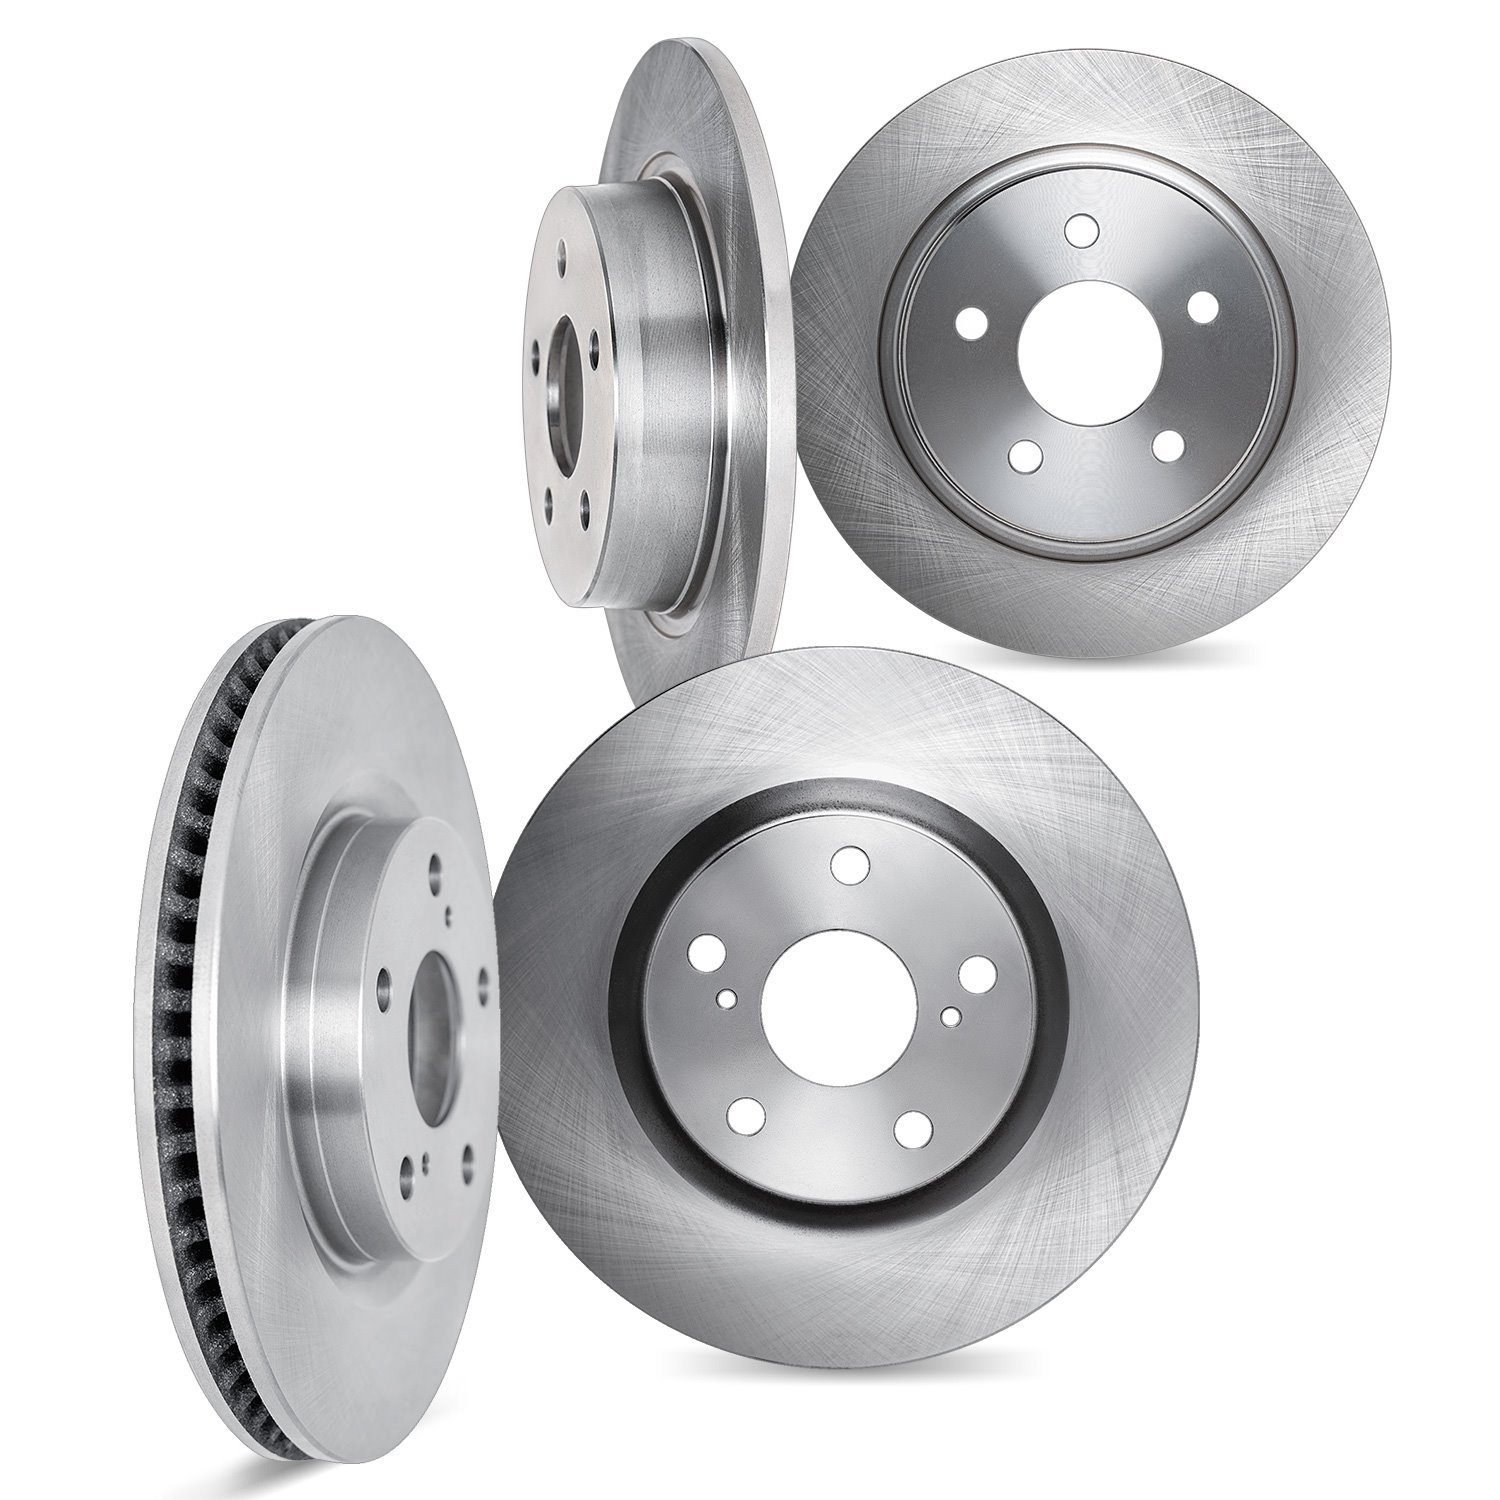 6004-73070 Brake Rotors, Fits Select Audi/Volkswagen, Position: Front and Rear